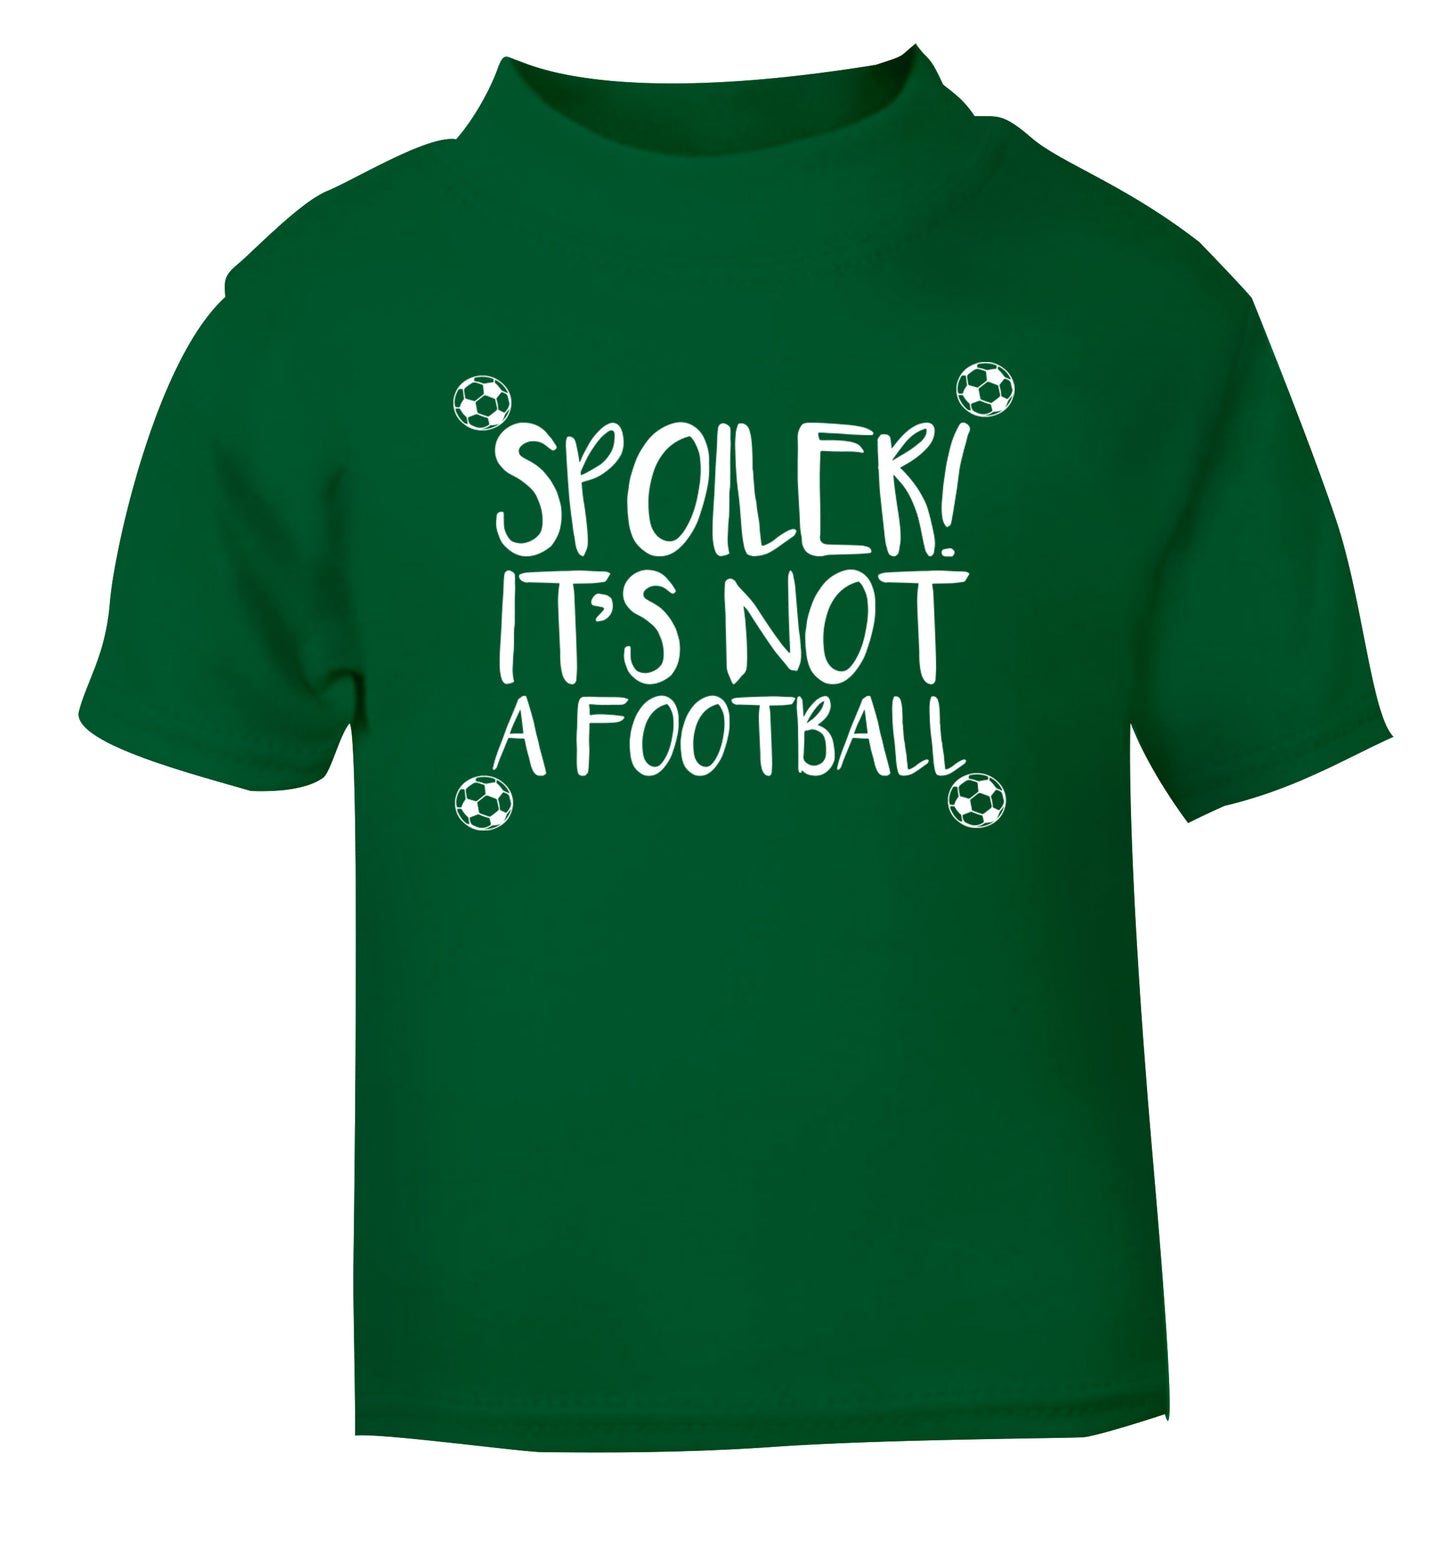 Spoiler it's not a football green Baby Toddler Tshirt 2 Years